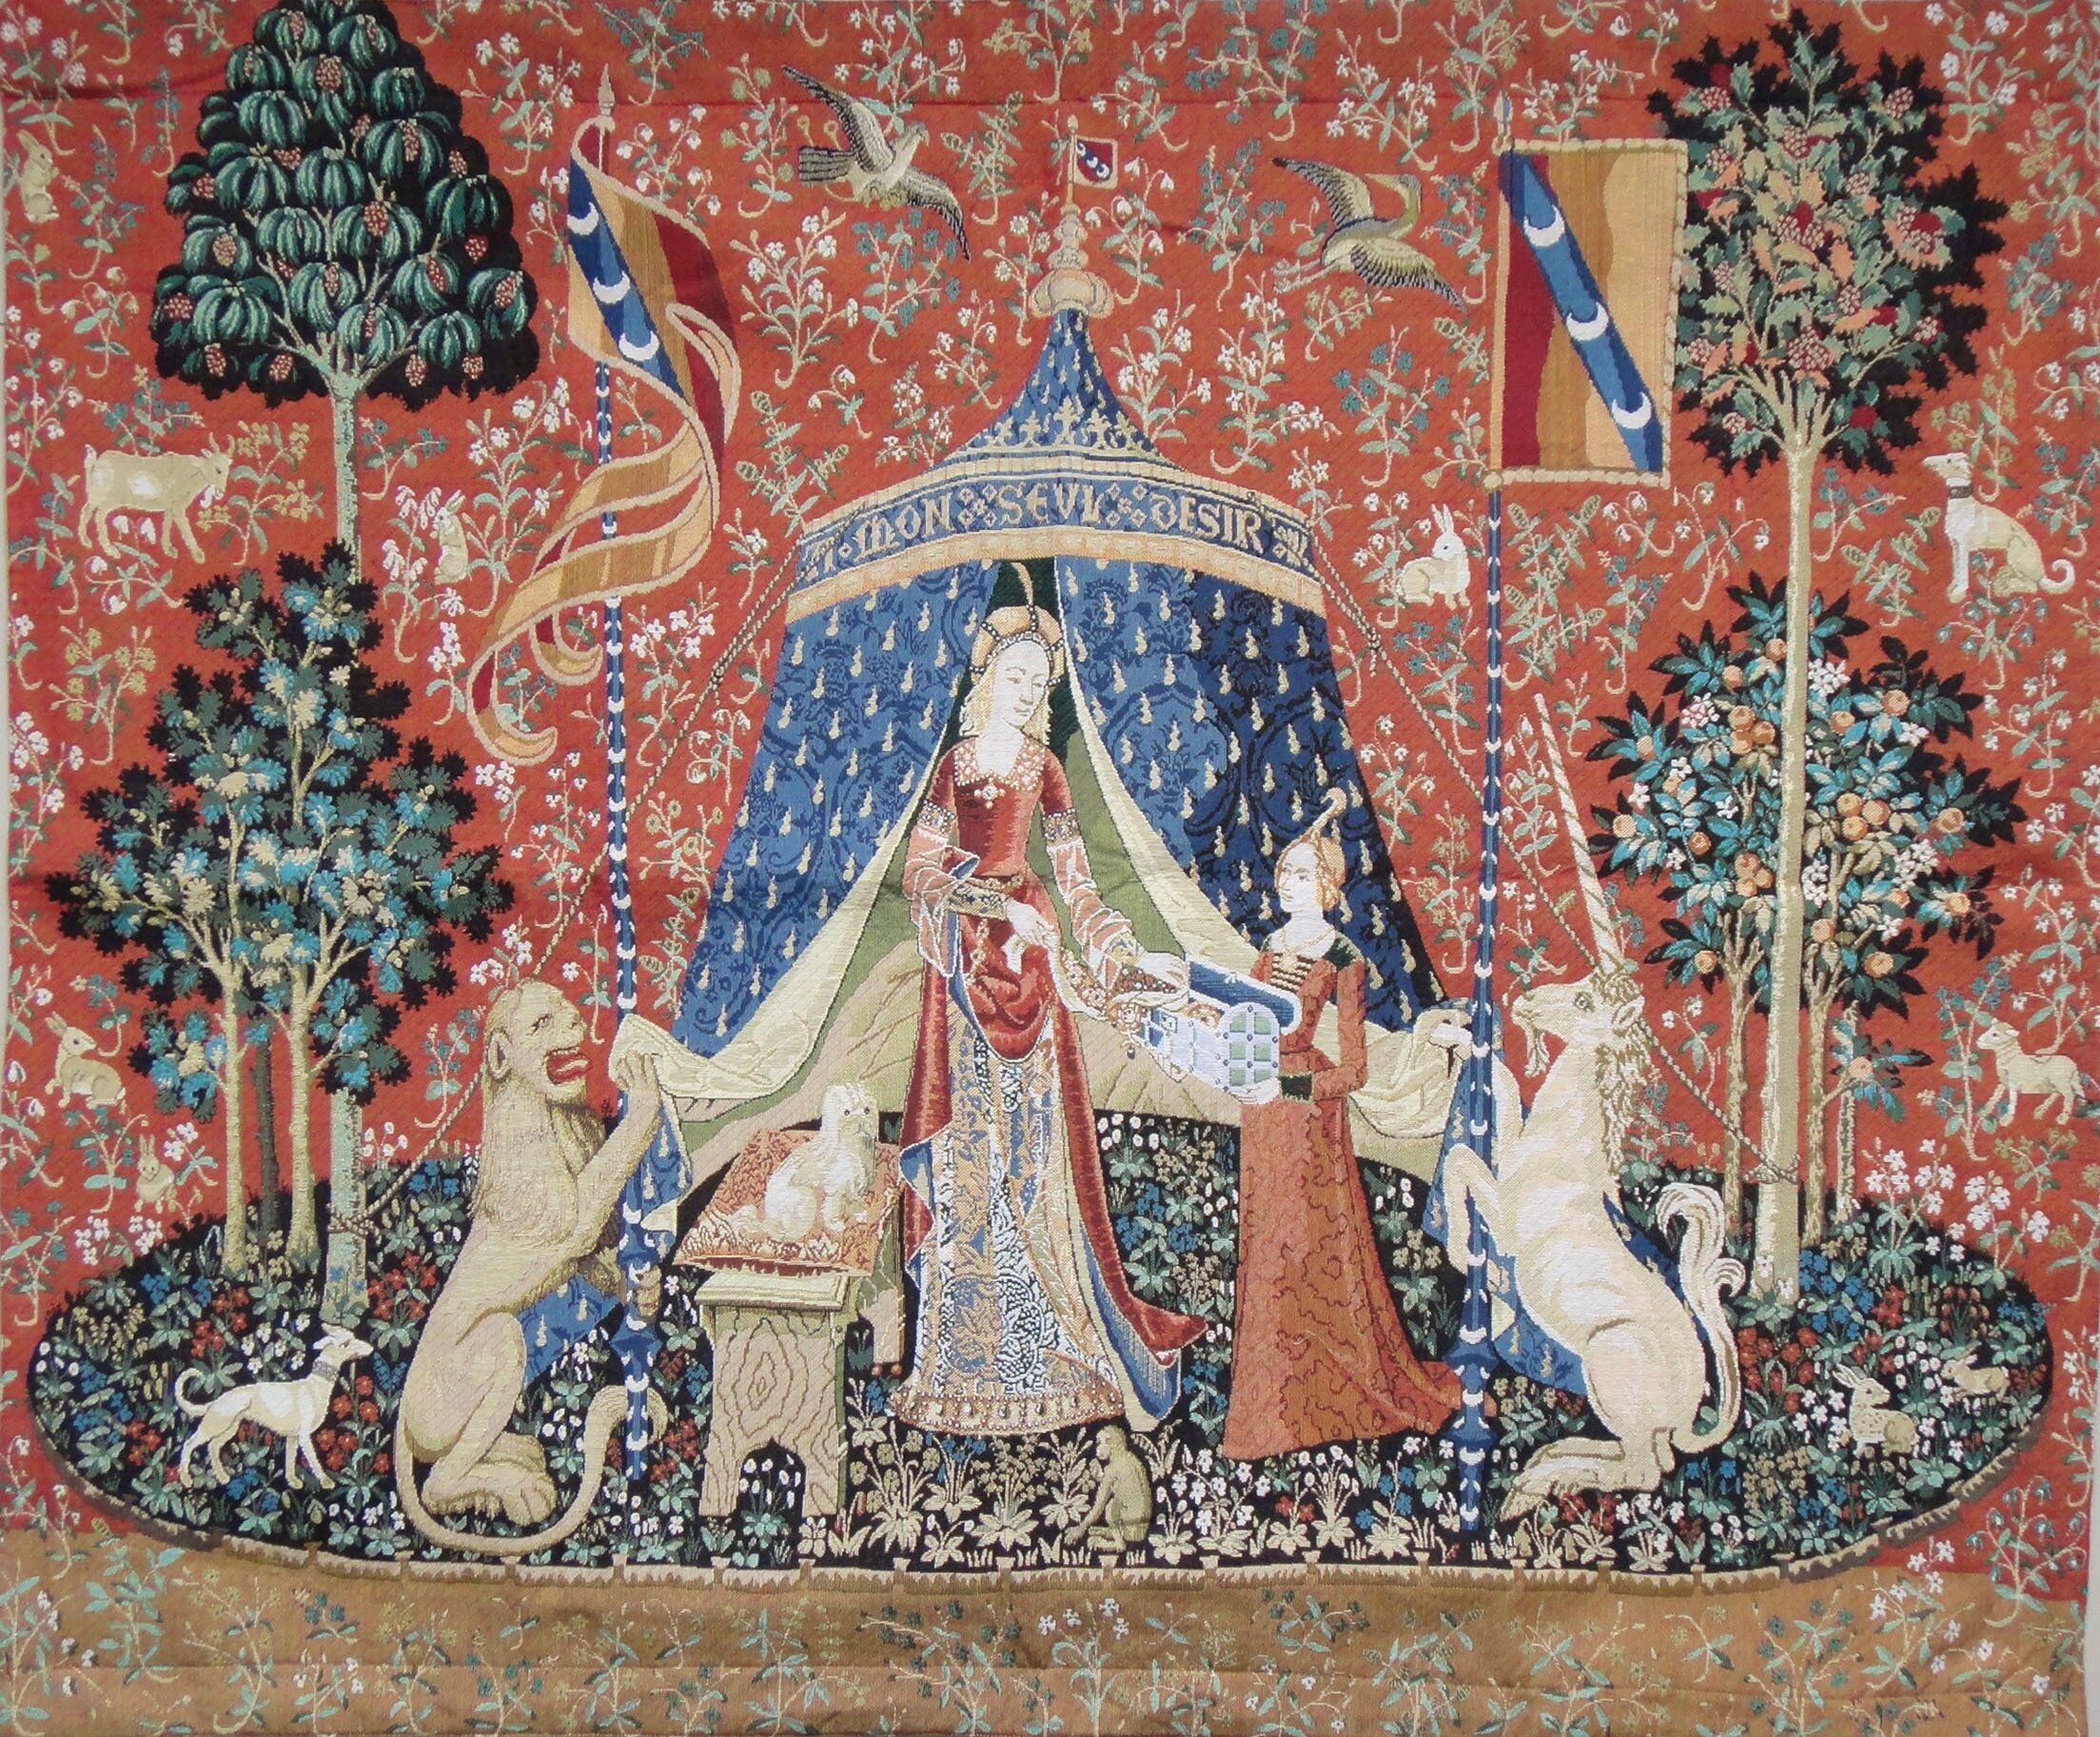 The Lady & The Unicorn Taste Woven Tapestry Wall Hanging Home Decor 100%  Cotton 